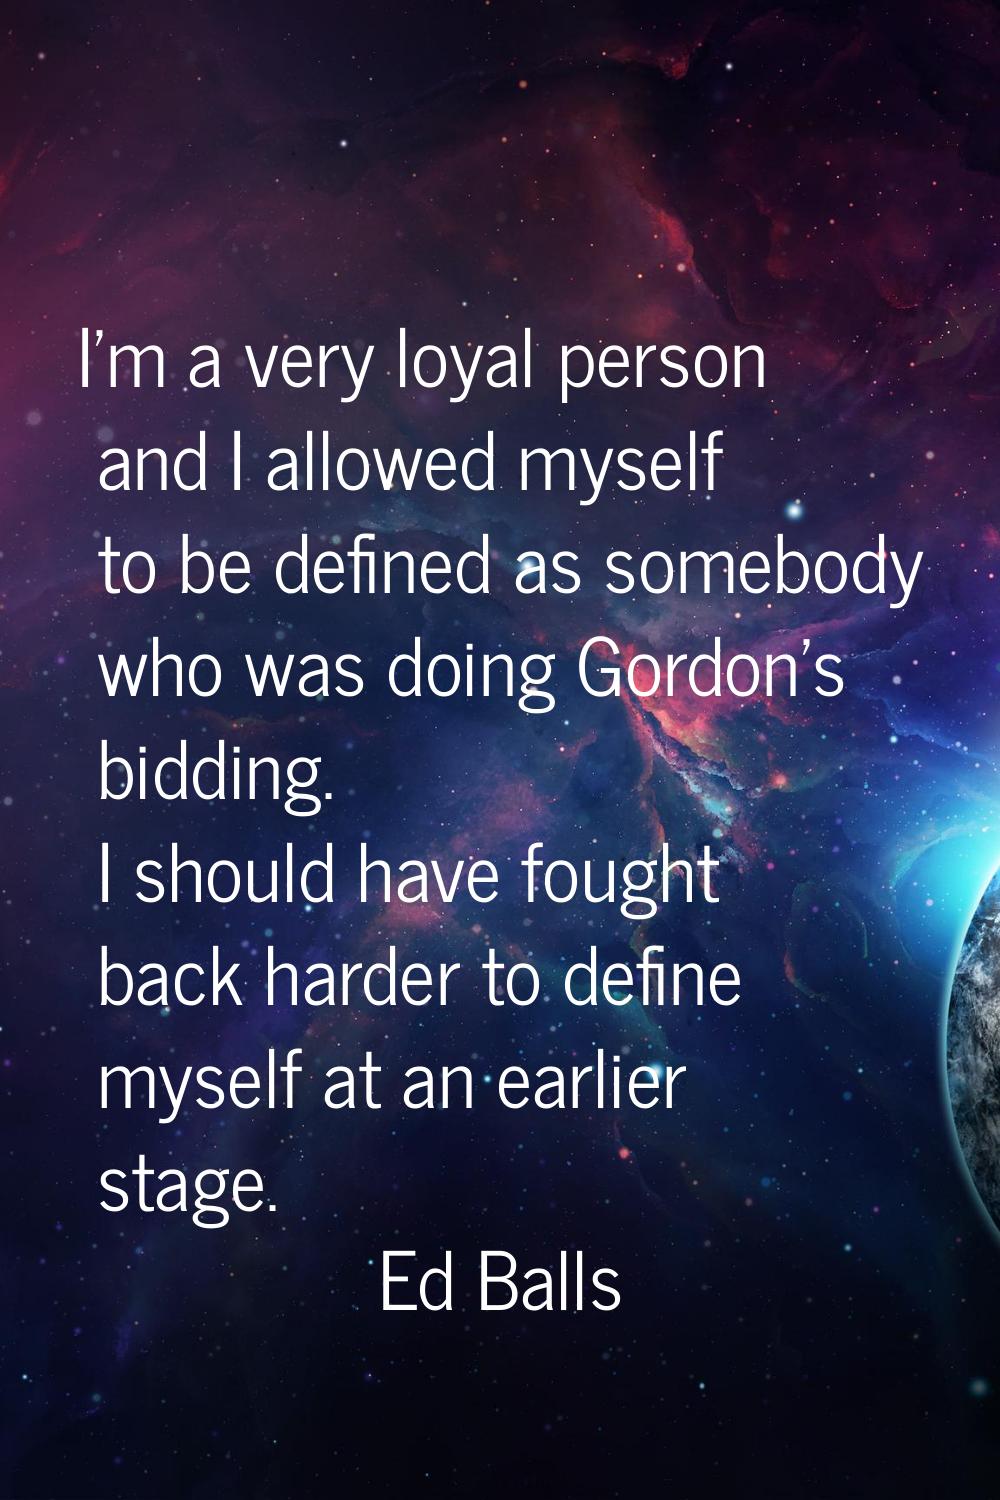 I'm a very loyal person and I allowed myself to be defined as somebody who was doing Gordon's biddi